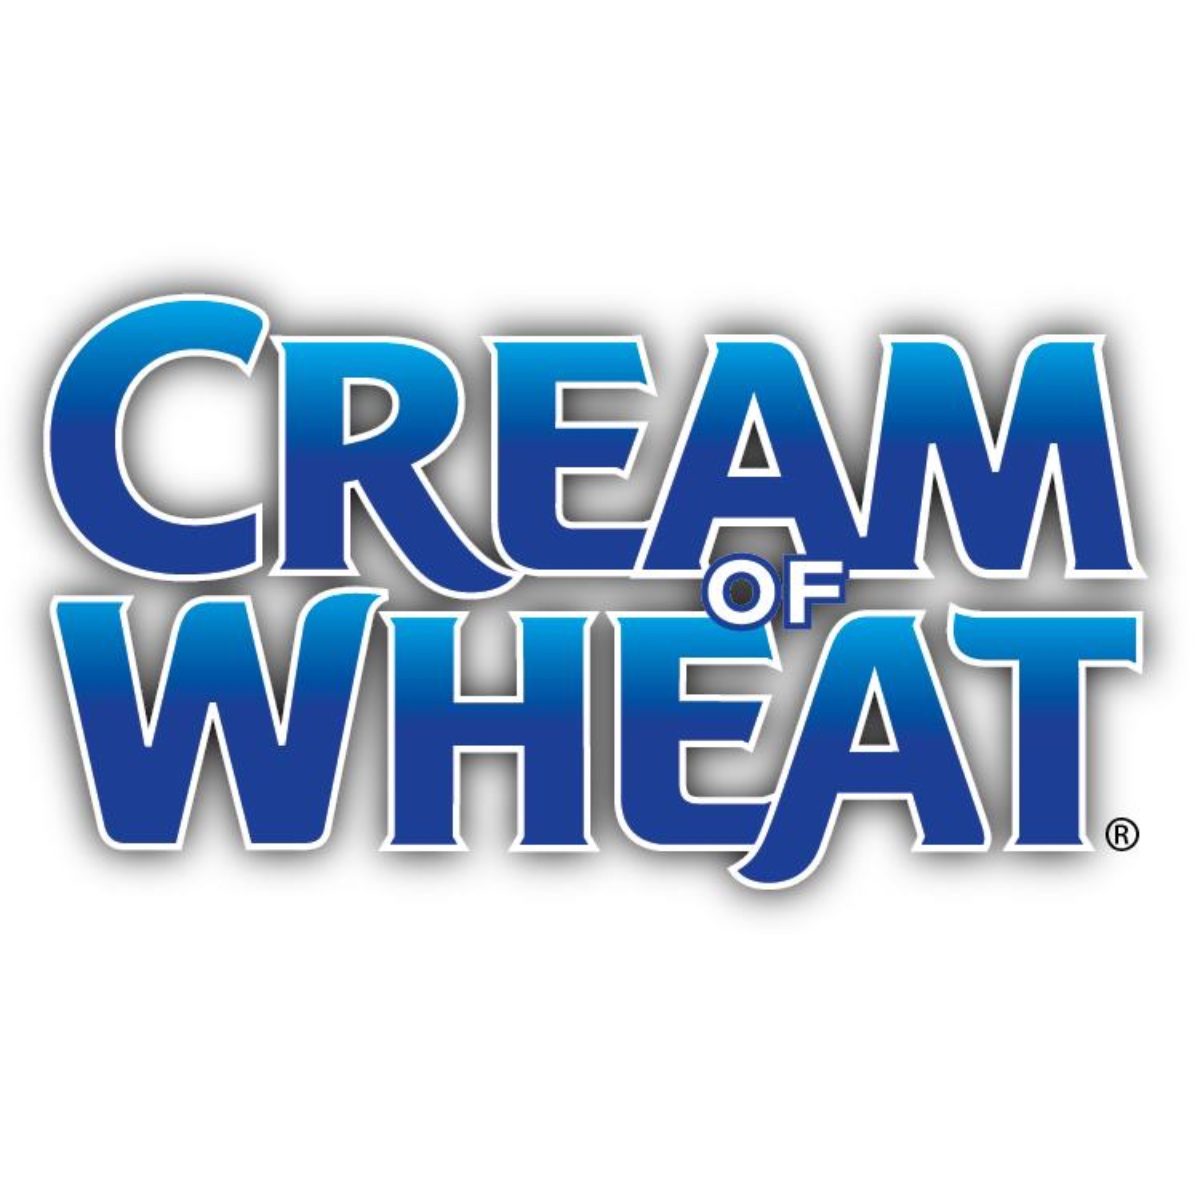 <p><strong><a class="SWhtmlLink" href="http://www.creamofwheat.com" rel="noopener">Cream of Wheat</a>, Grand Forks</strong></p> <p>You might not know that North Dakota is one of the top producers of spring wheat, growing almost half of the country's supply along with barley, oats and durum wheat (for making pasta). So, it's no surprise that the breakfast staple, Cream of Wheat, was invented by wheat millers in Grand Forks, ND, back in 1893.</p>